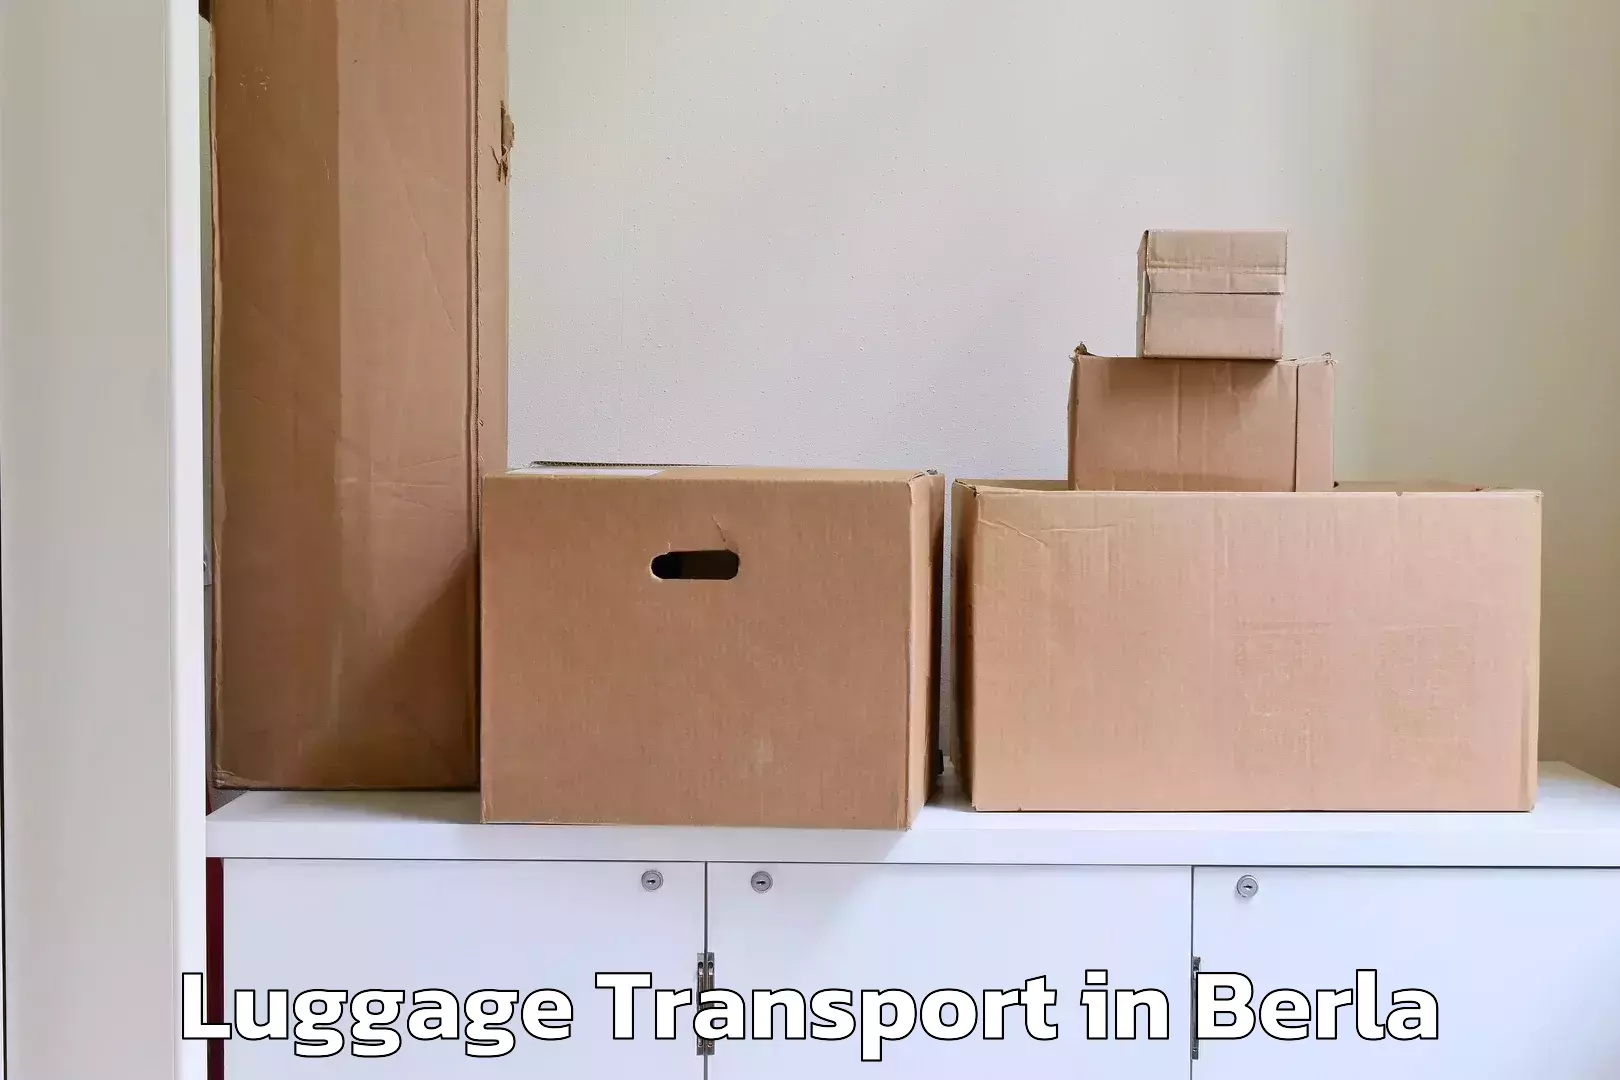 Luggage shipment specialists in Berla